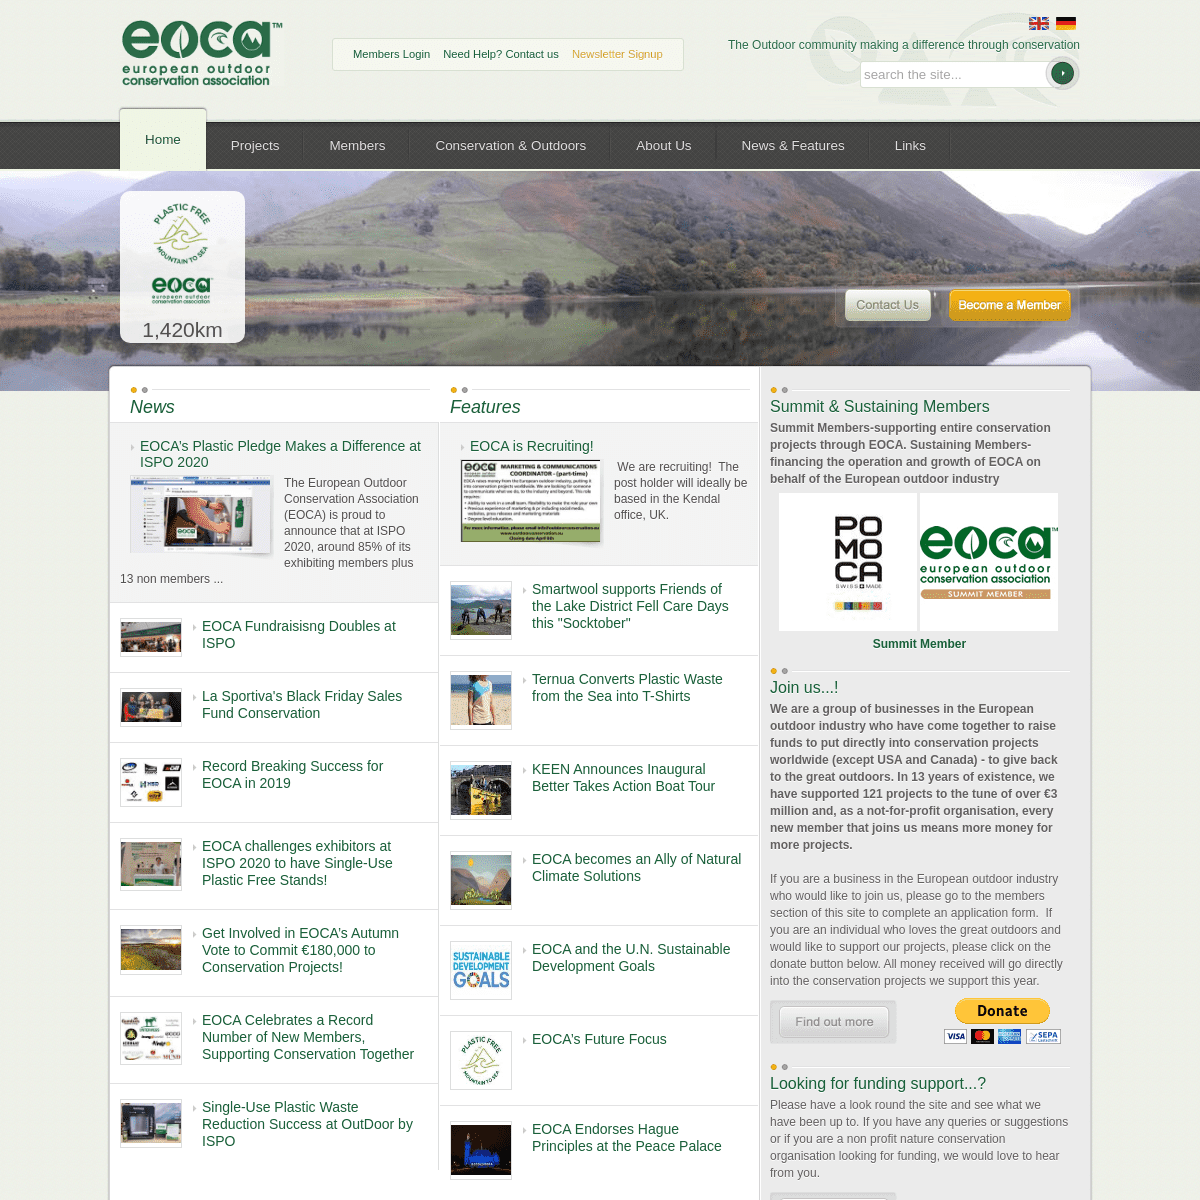 A complete backup of outdoorconservation.eu